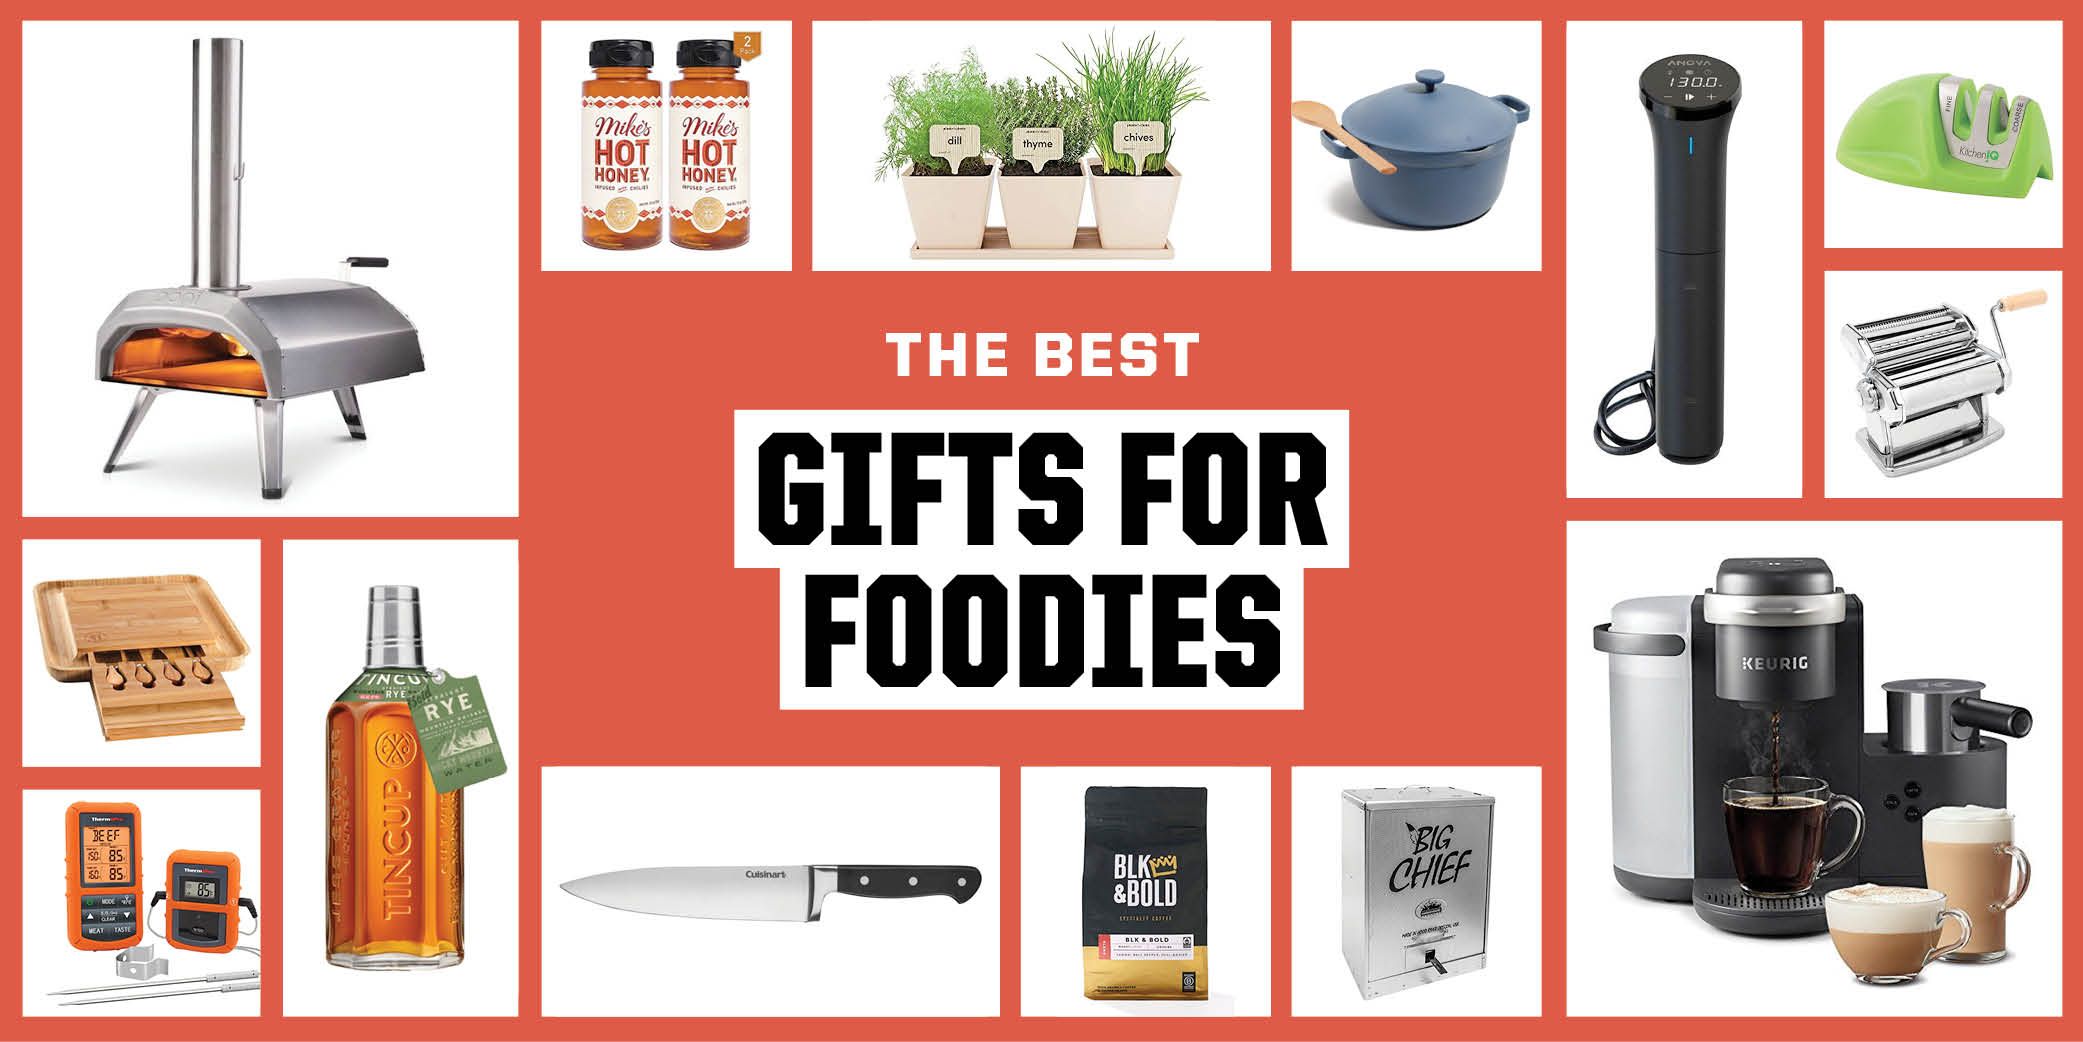 38 Best Gifts for Foodies in 2022 - Gifts for Food Lovers